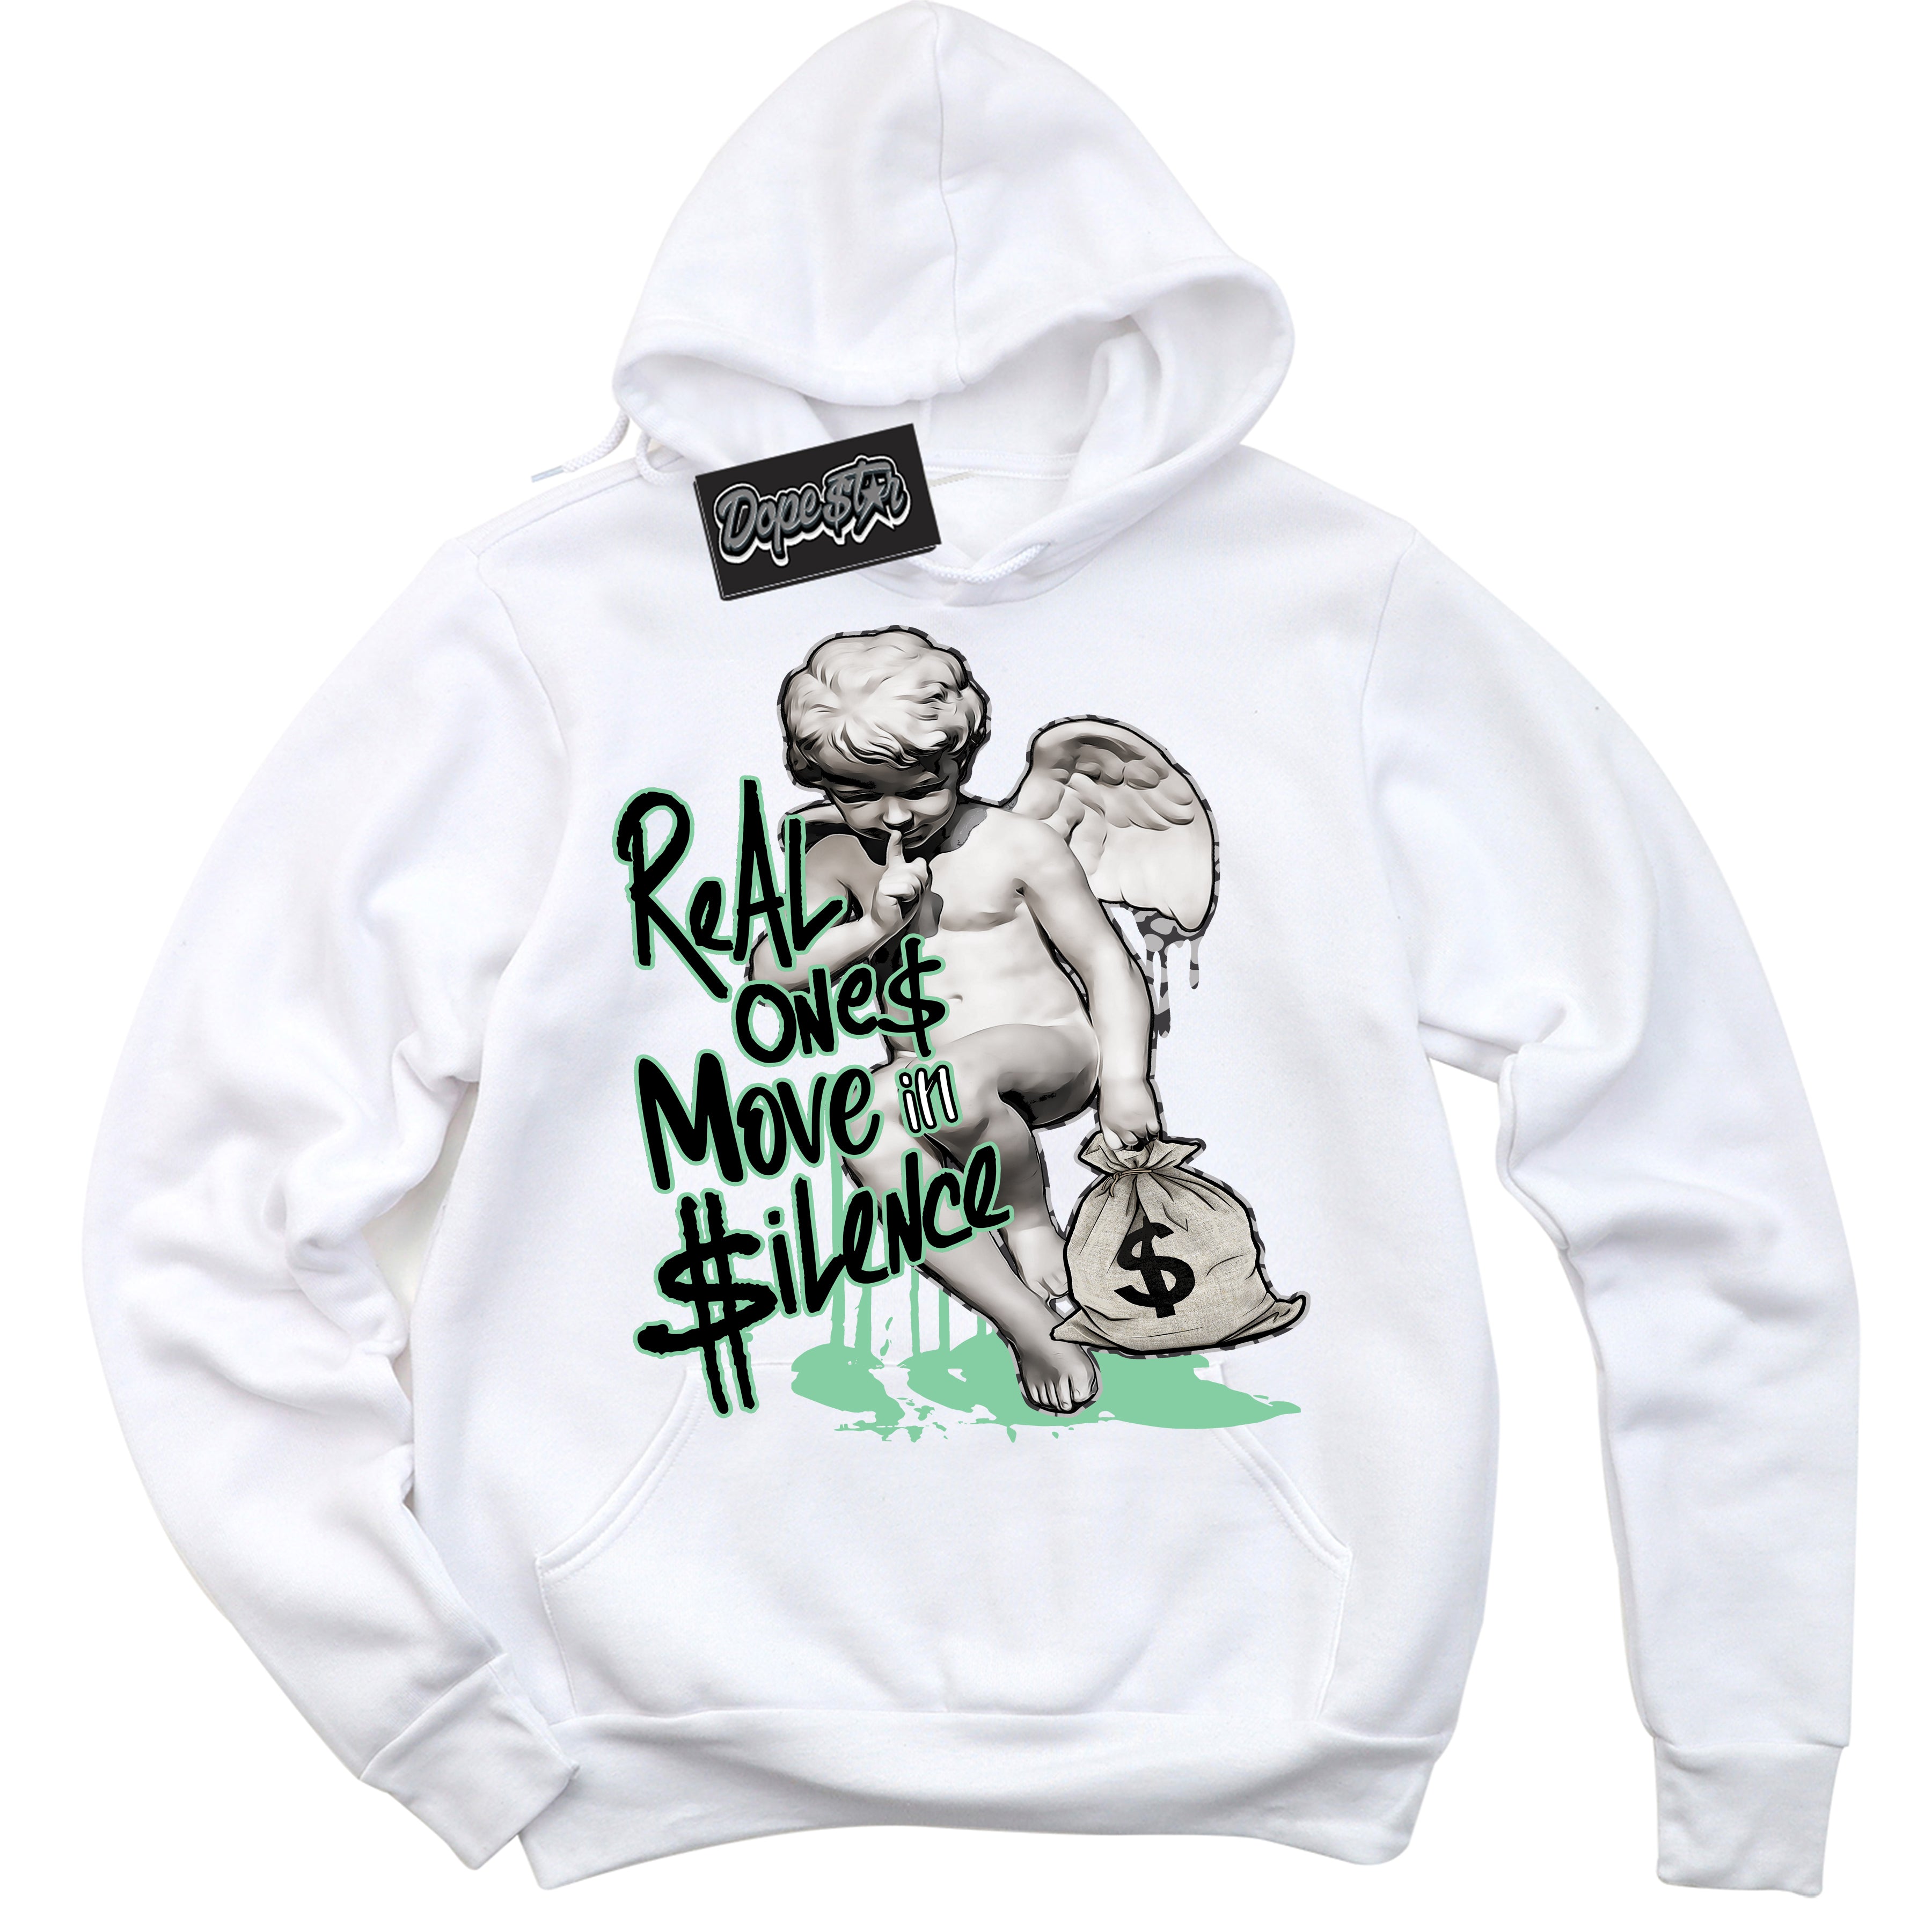 Cool White Graphic DopeStar Hoodie with “ Real Ones Cherub “ print, that perfectly matches Green Glow 3s sneakers